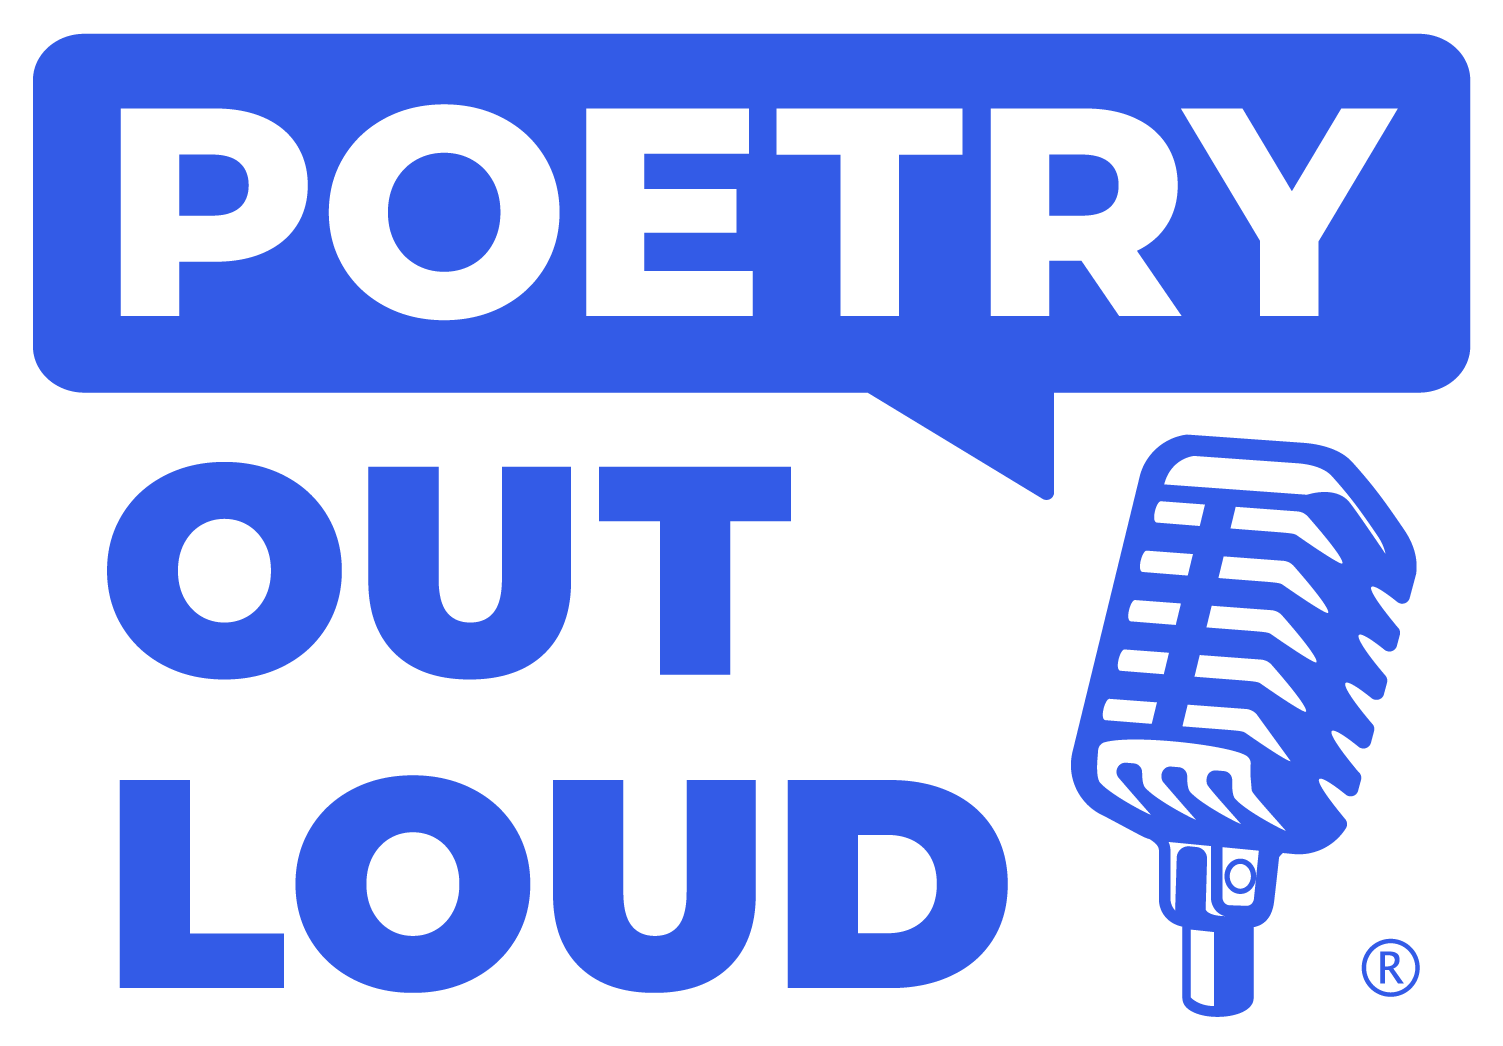 The Poetry Out Loud logo.